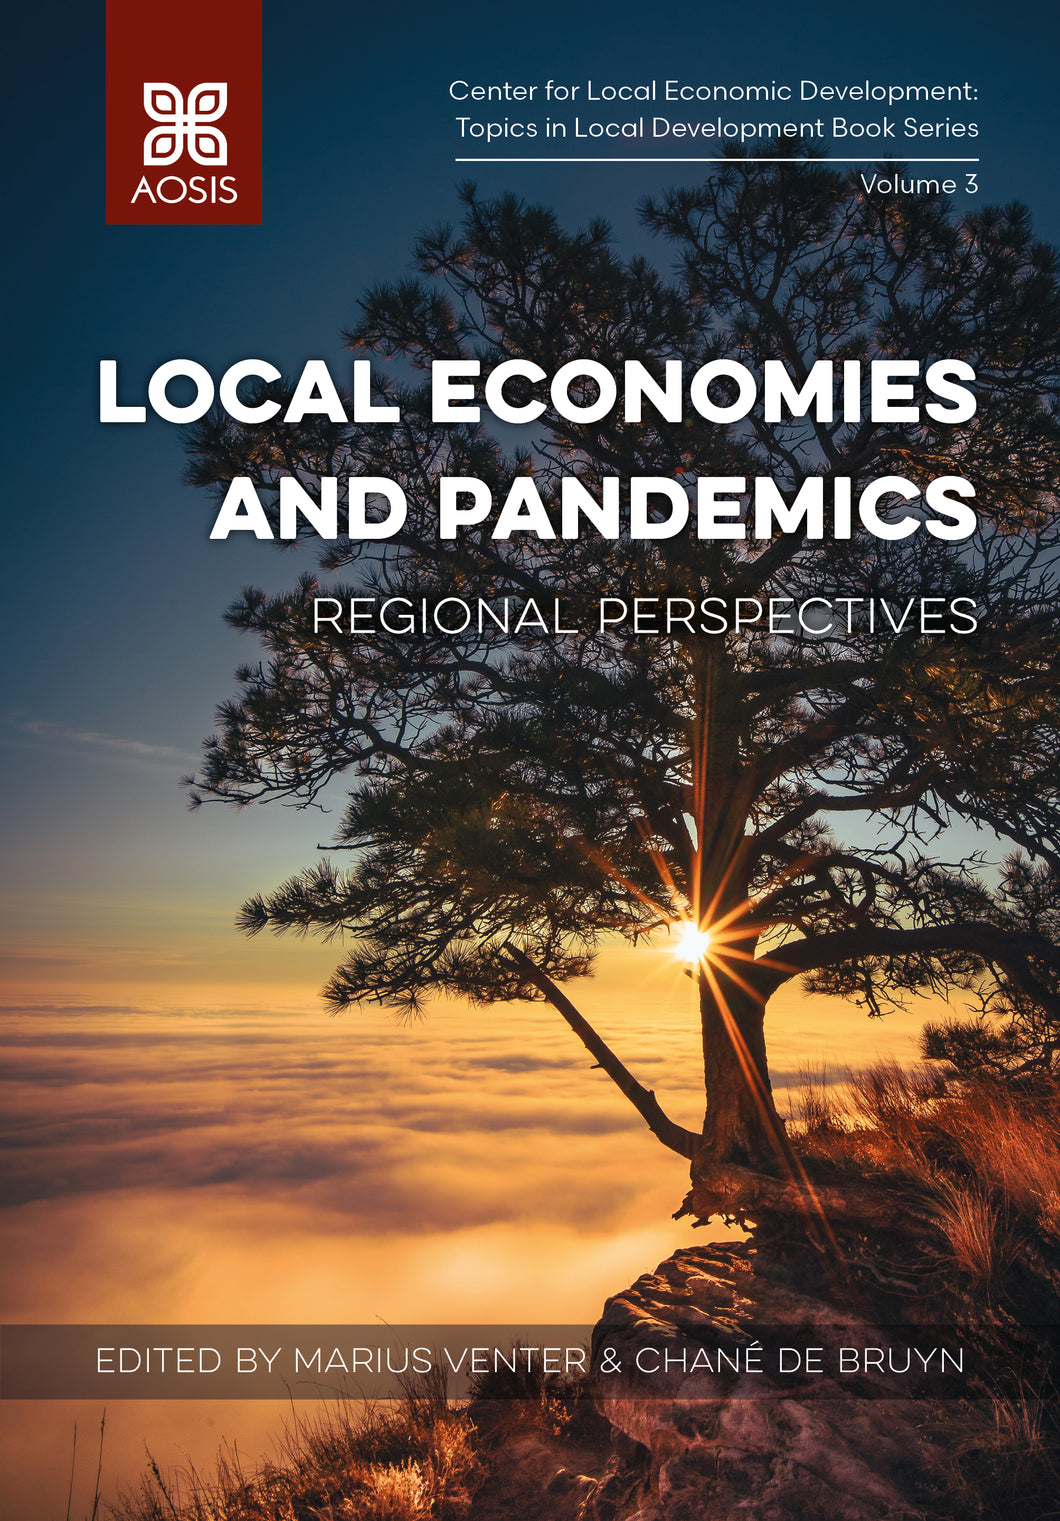 Local economies and pandemics: Regional perspectives